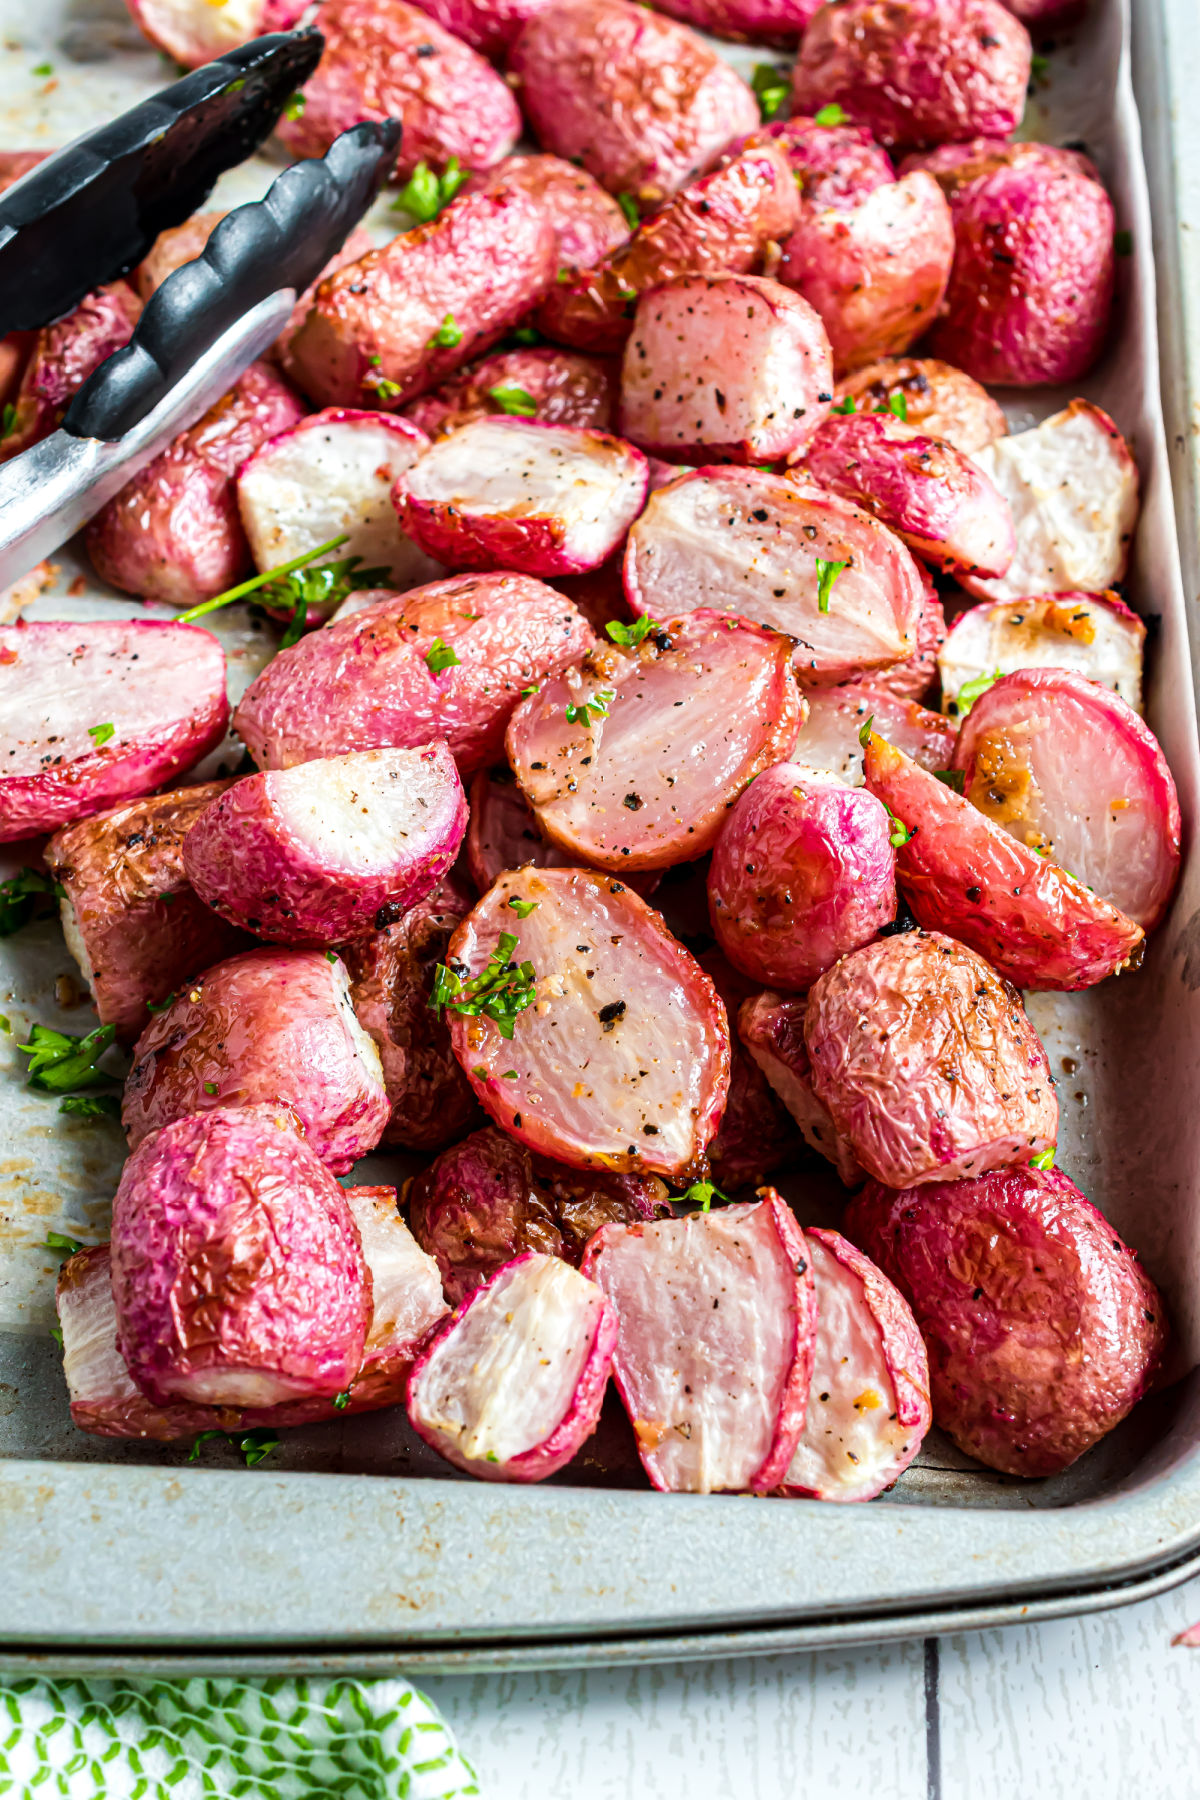 Roasted radishes with garlic and herbs on a cookie sheet.